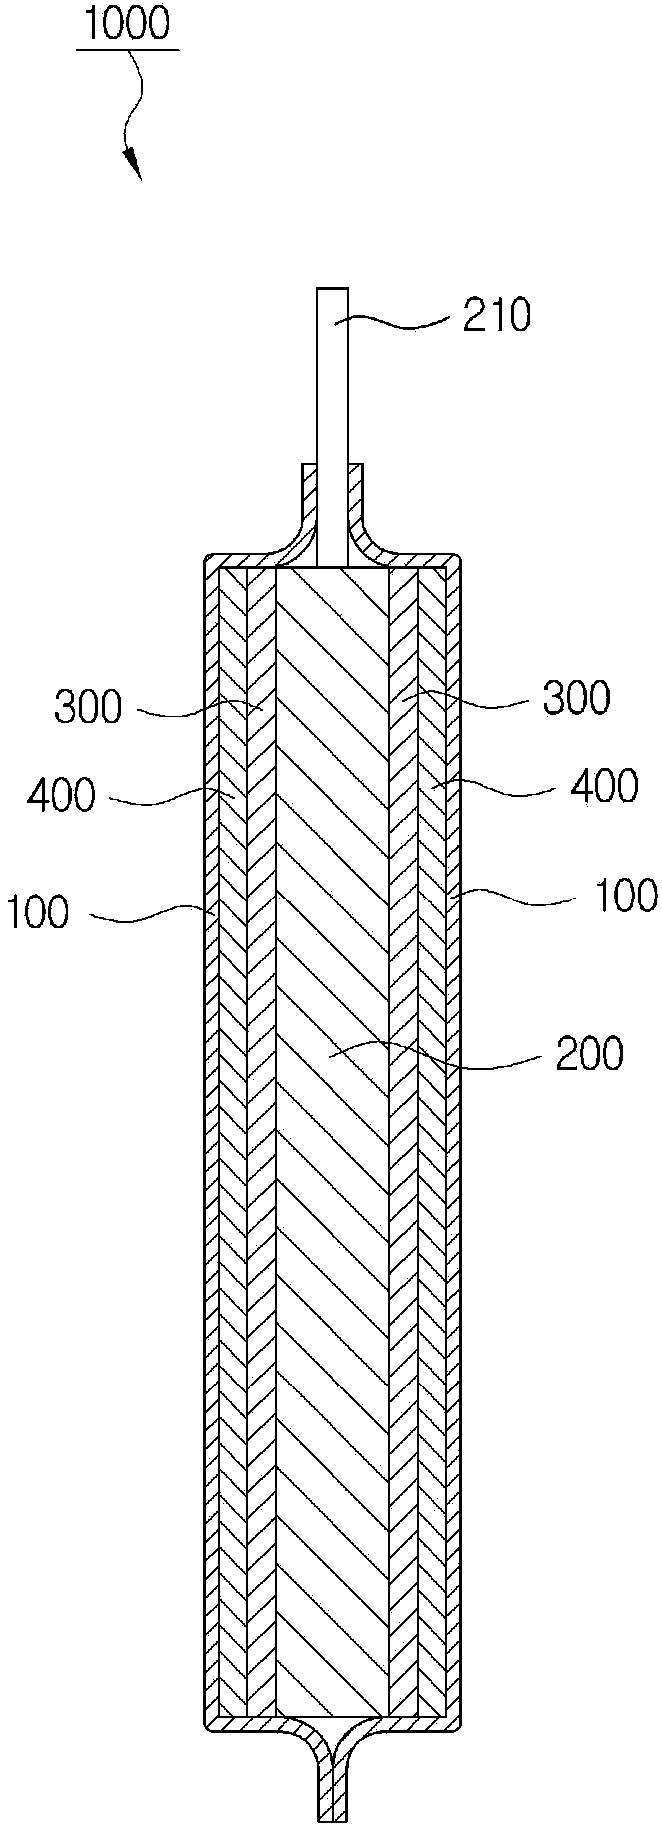 Secondary Battery and Secondary Battery Pack Having the Same